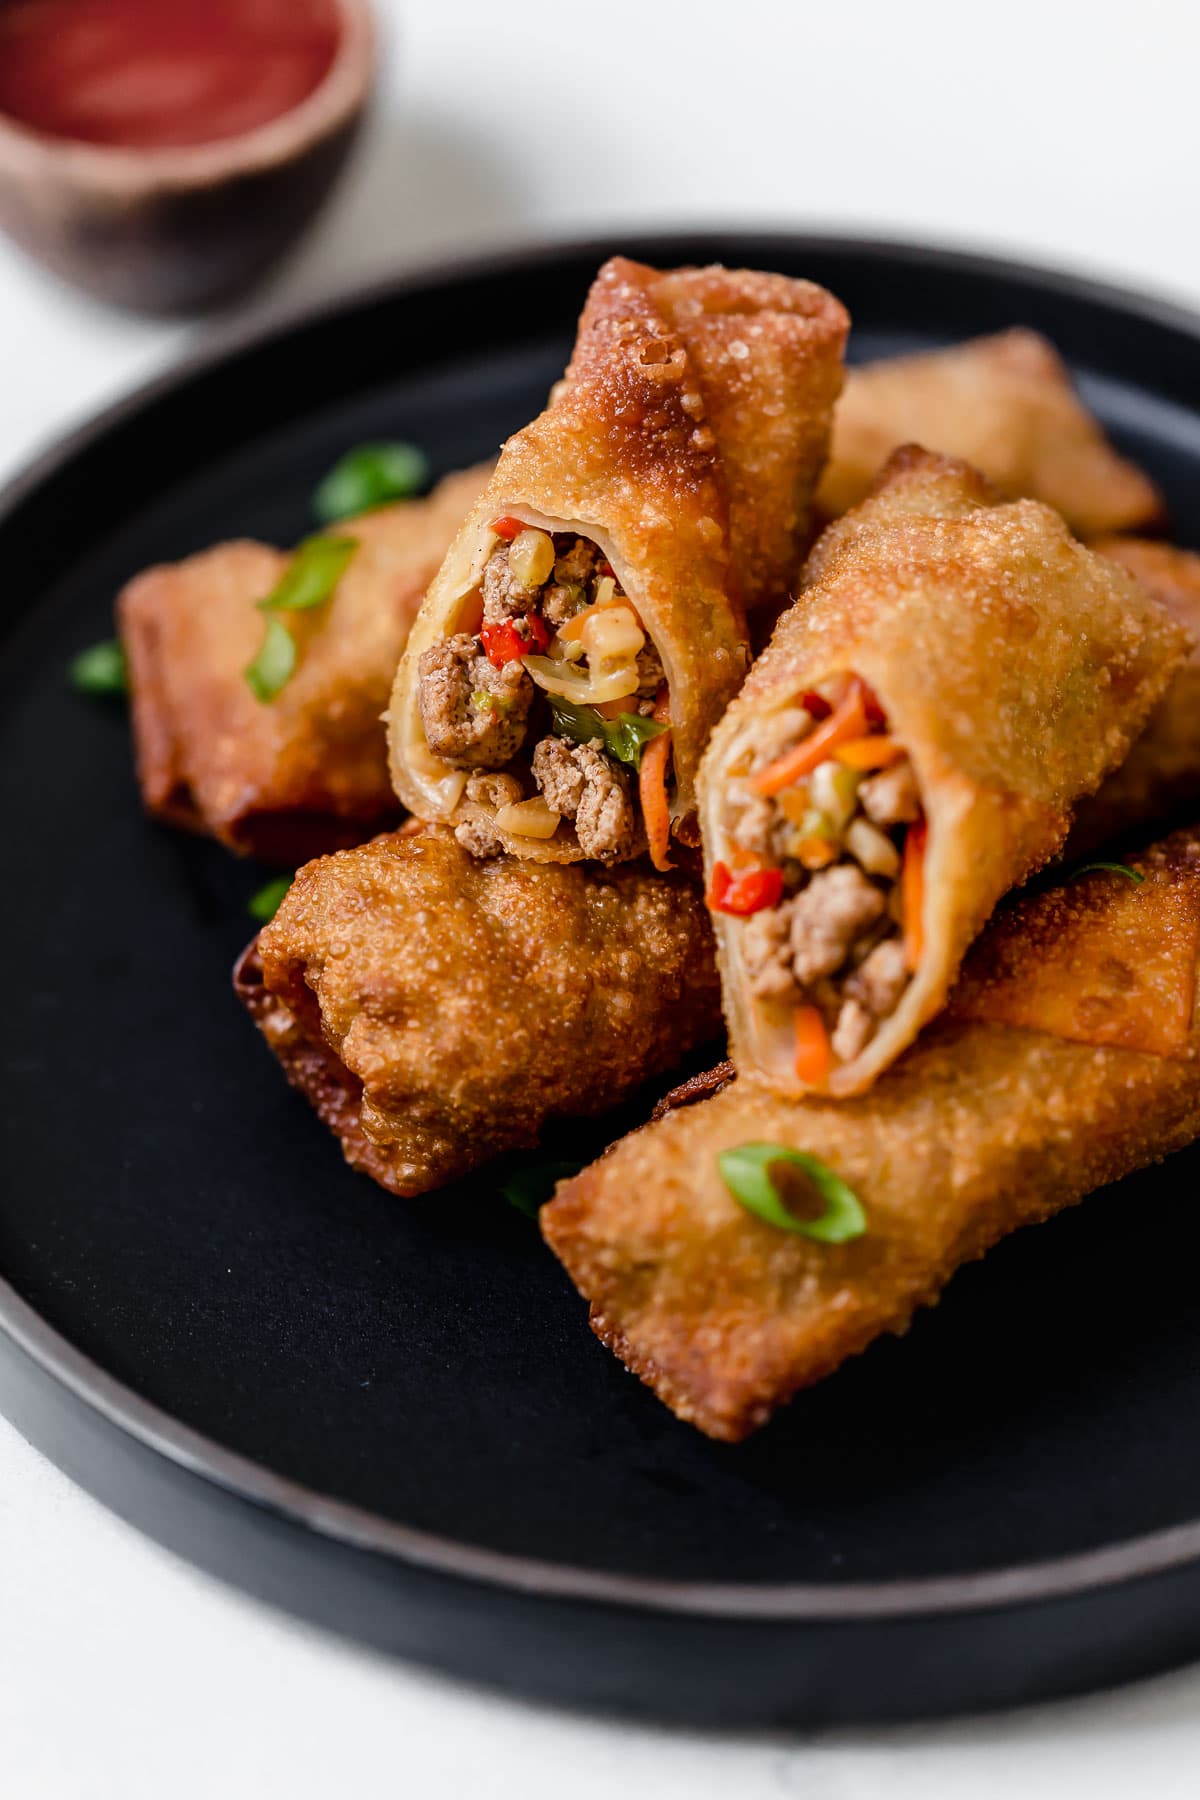 Egg Rolls Fried Or Baked Cooking Classy,When Are Strawberries In Season In Texas